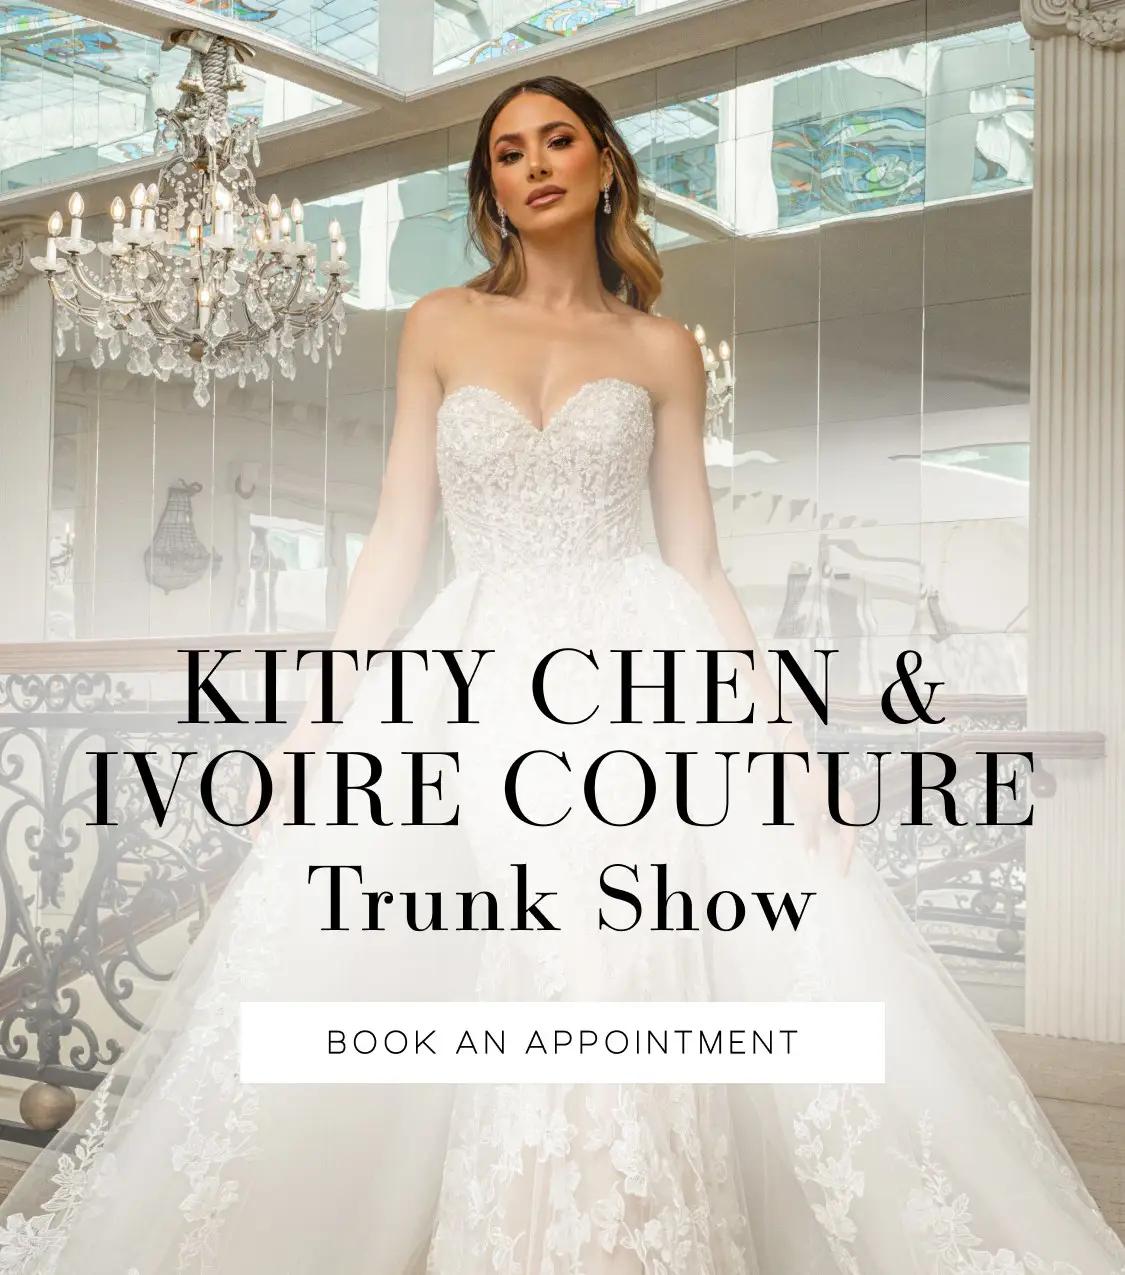 Kitty Chen & Ivoire Couture Trunk Show banner mobile